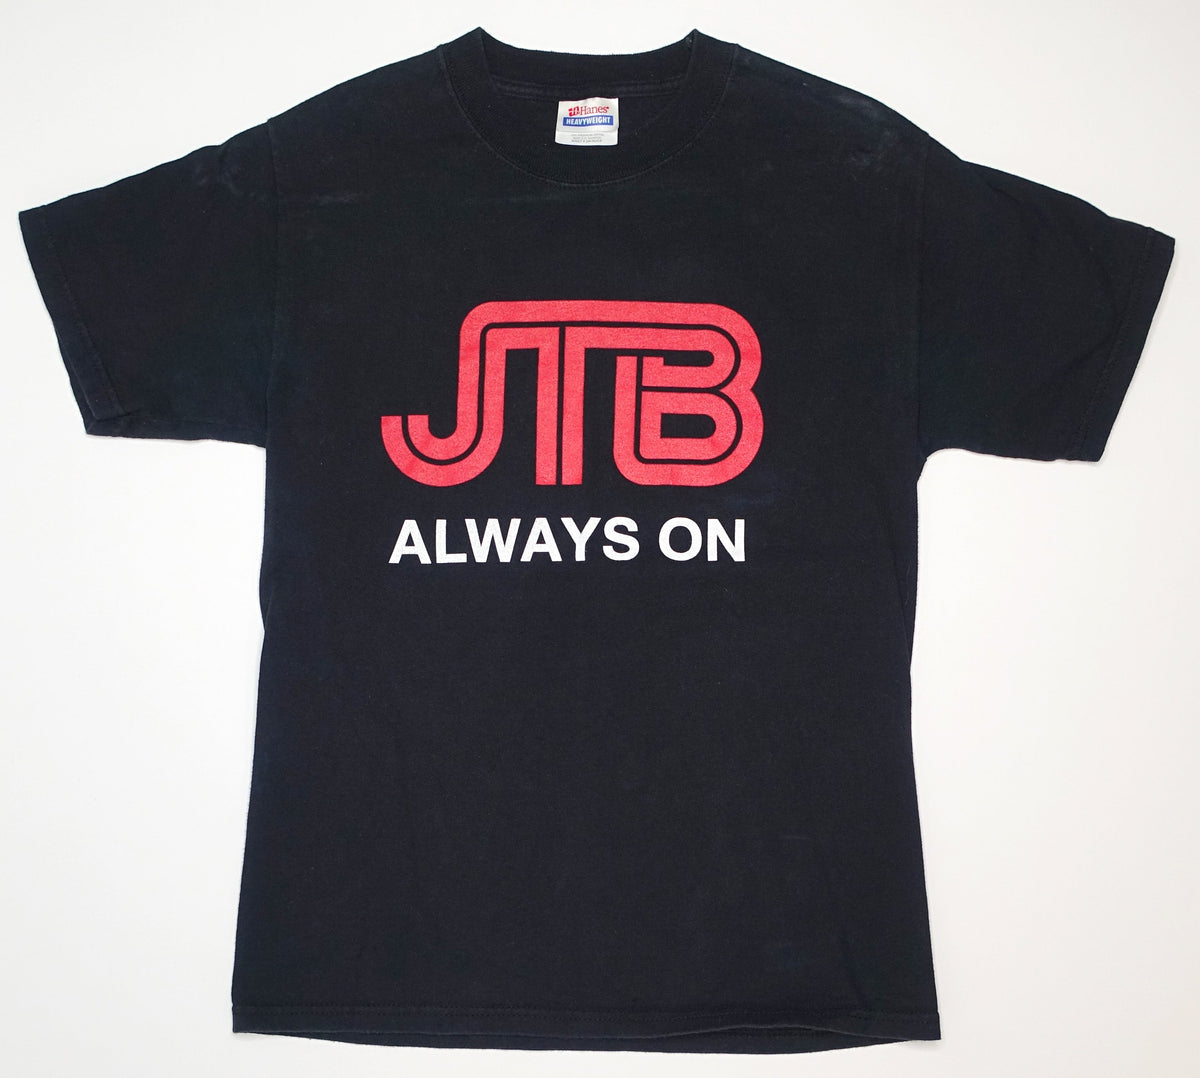 Jets To Brazil - JTB Always On 00's Tour Shirt Size Small – the Minor Thread